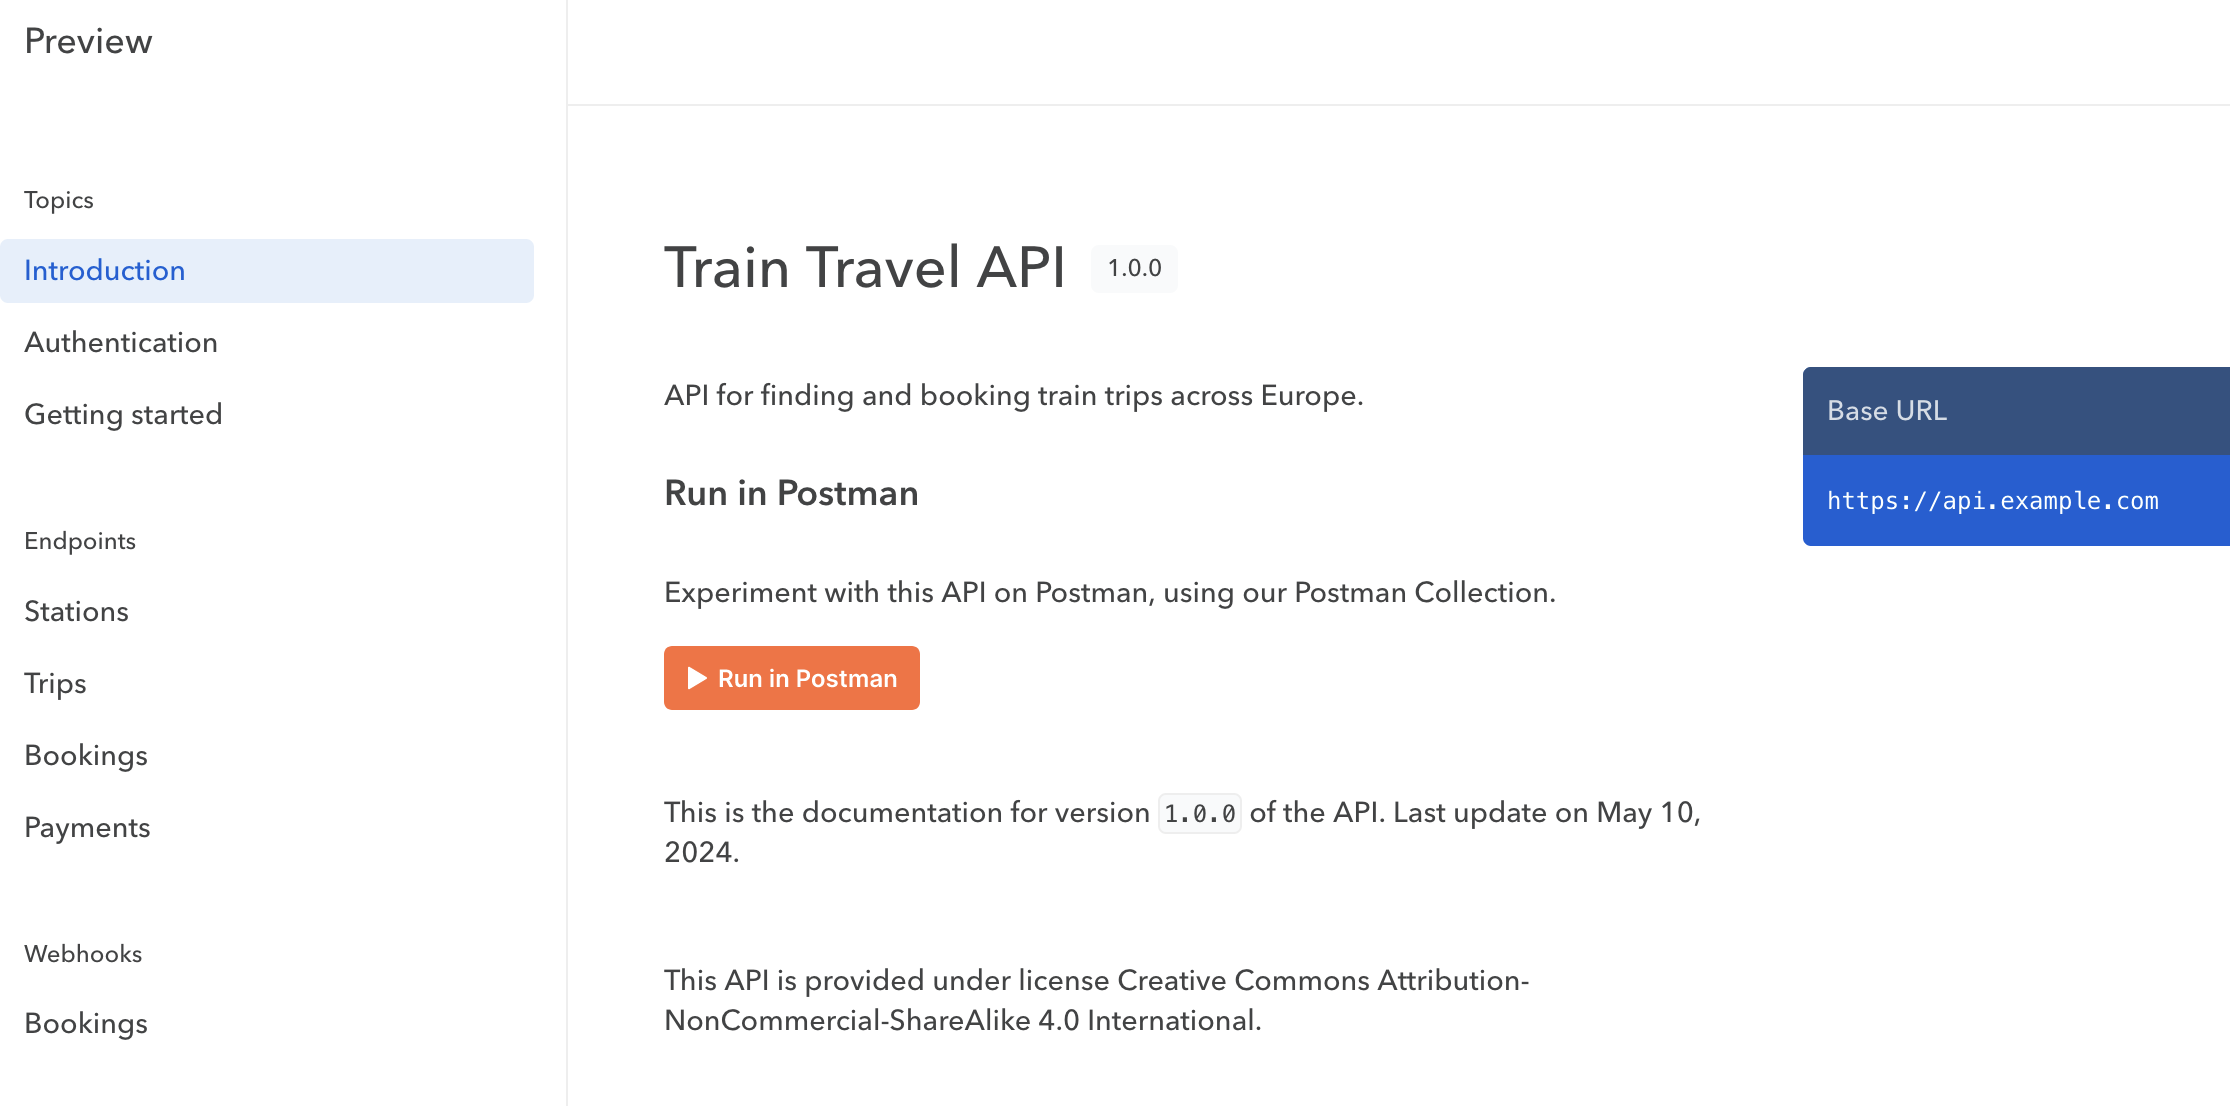 Back in the Bump.sh hosted API documentation we've added a "Run in Postman" section with the paragraph added in Markdown above, and the orange Run in Postman button showing